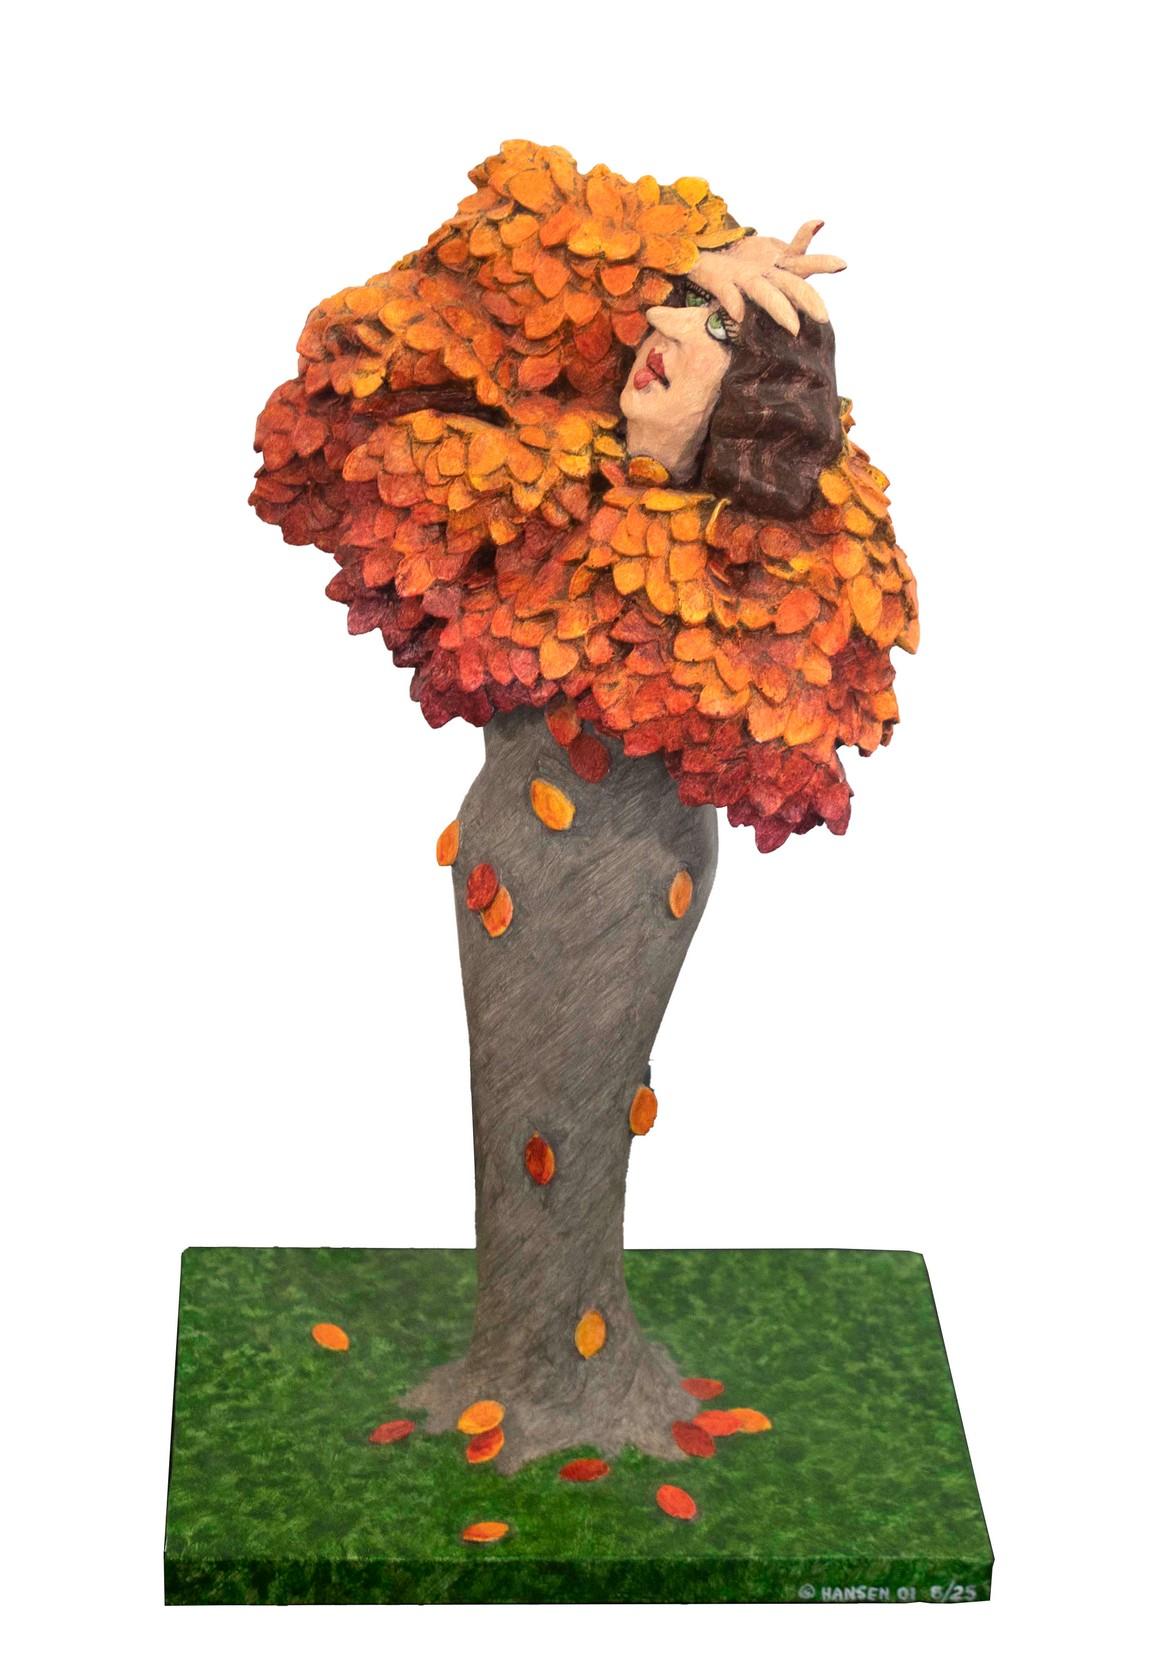 For your consideration is a humorous and whimsical papier mache sculpture titled Fall by Michigan artist Stephen Hansen (17.25 H X 10 W X 7 D). A Seattle native, Stephen Hansen moved to New Mexico in 1984, and has been working as a professional